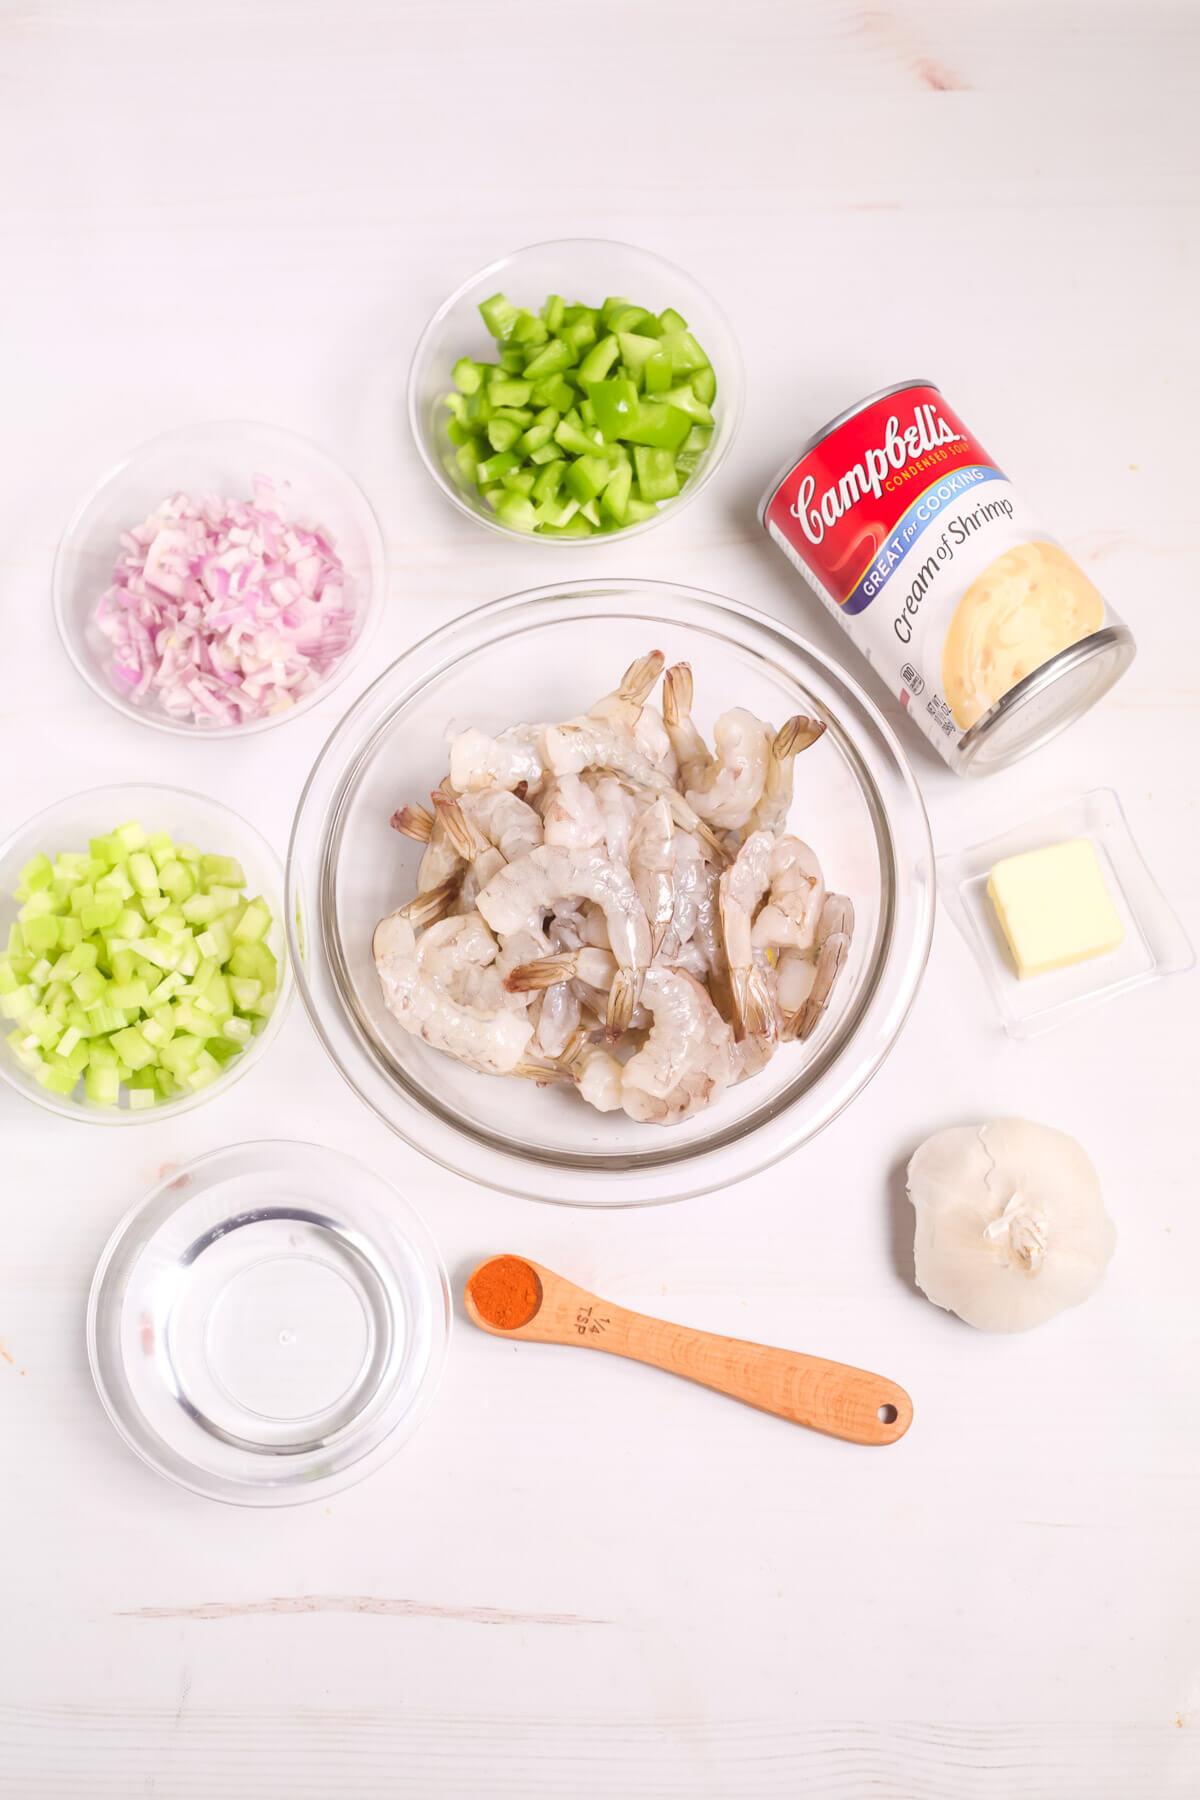 Ingredients laid out for a Creamy Garlic Shrimp and Rice recipe, including shrimp, diced vegetables, garlic, butter, and a can of cream of shrimp soup.